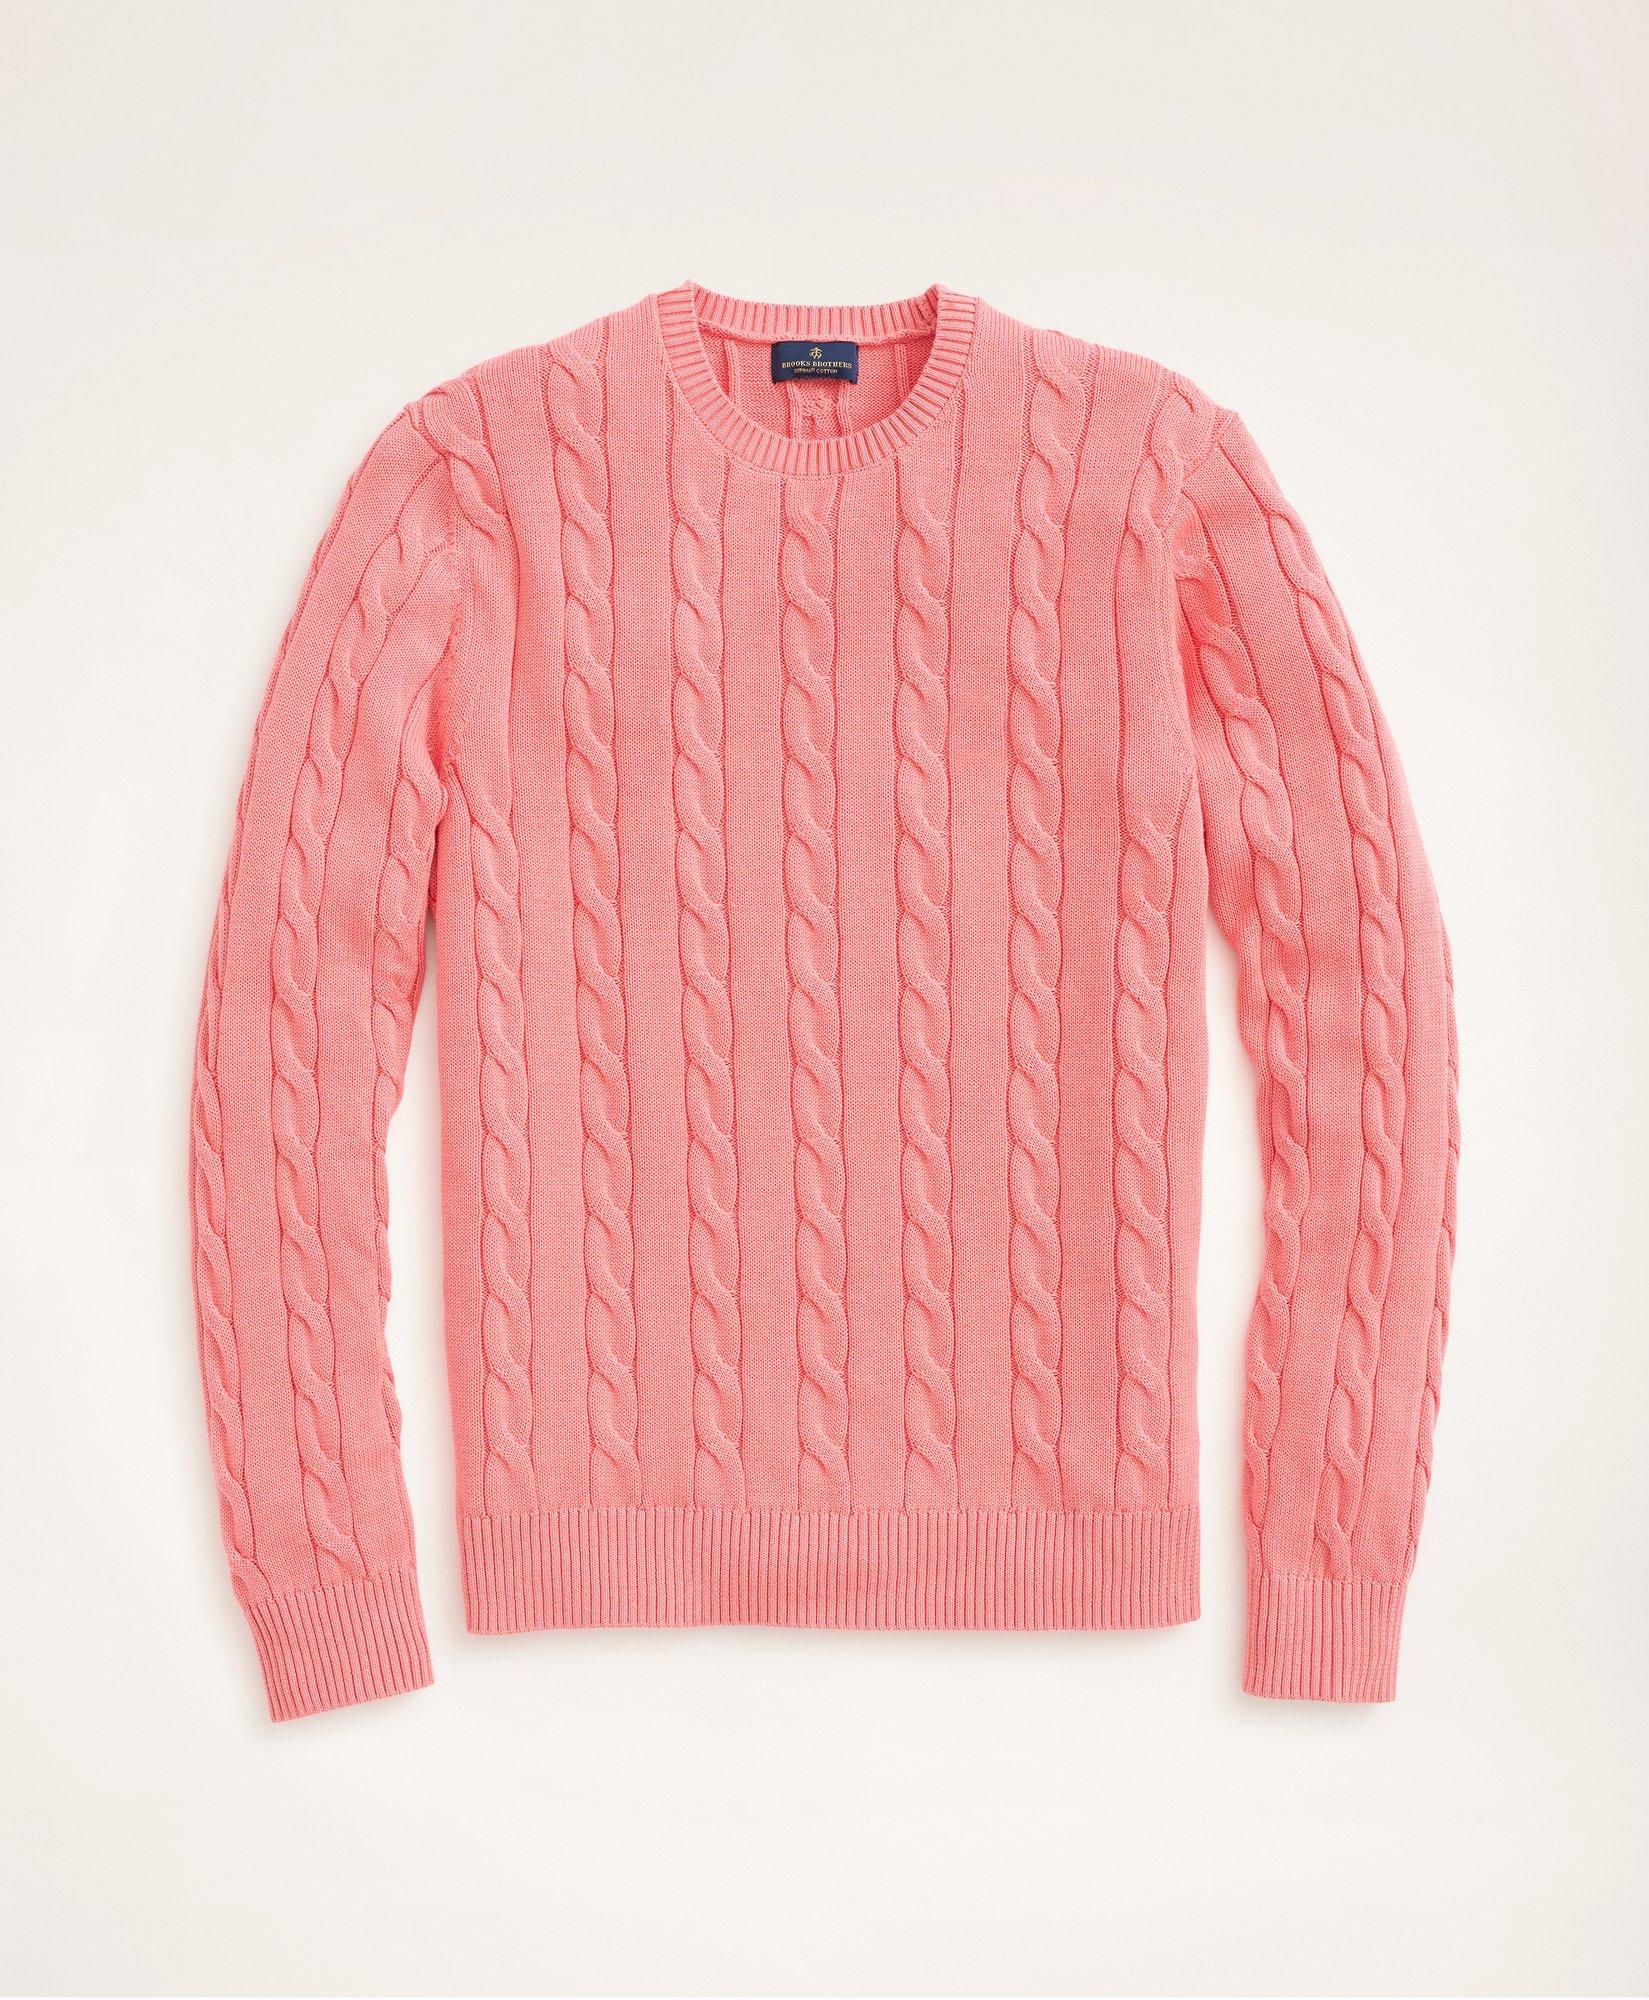 Brooks Brothers Big & Tall Supima Cotton Cable Crewneck Sweater | Pink | Size 2x